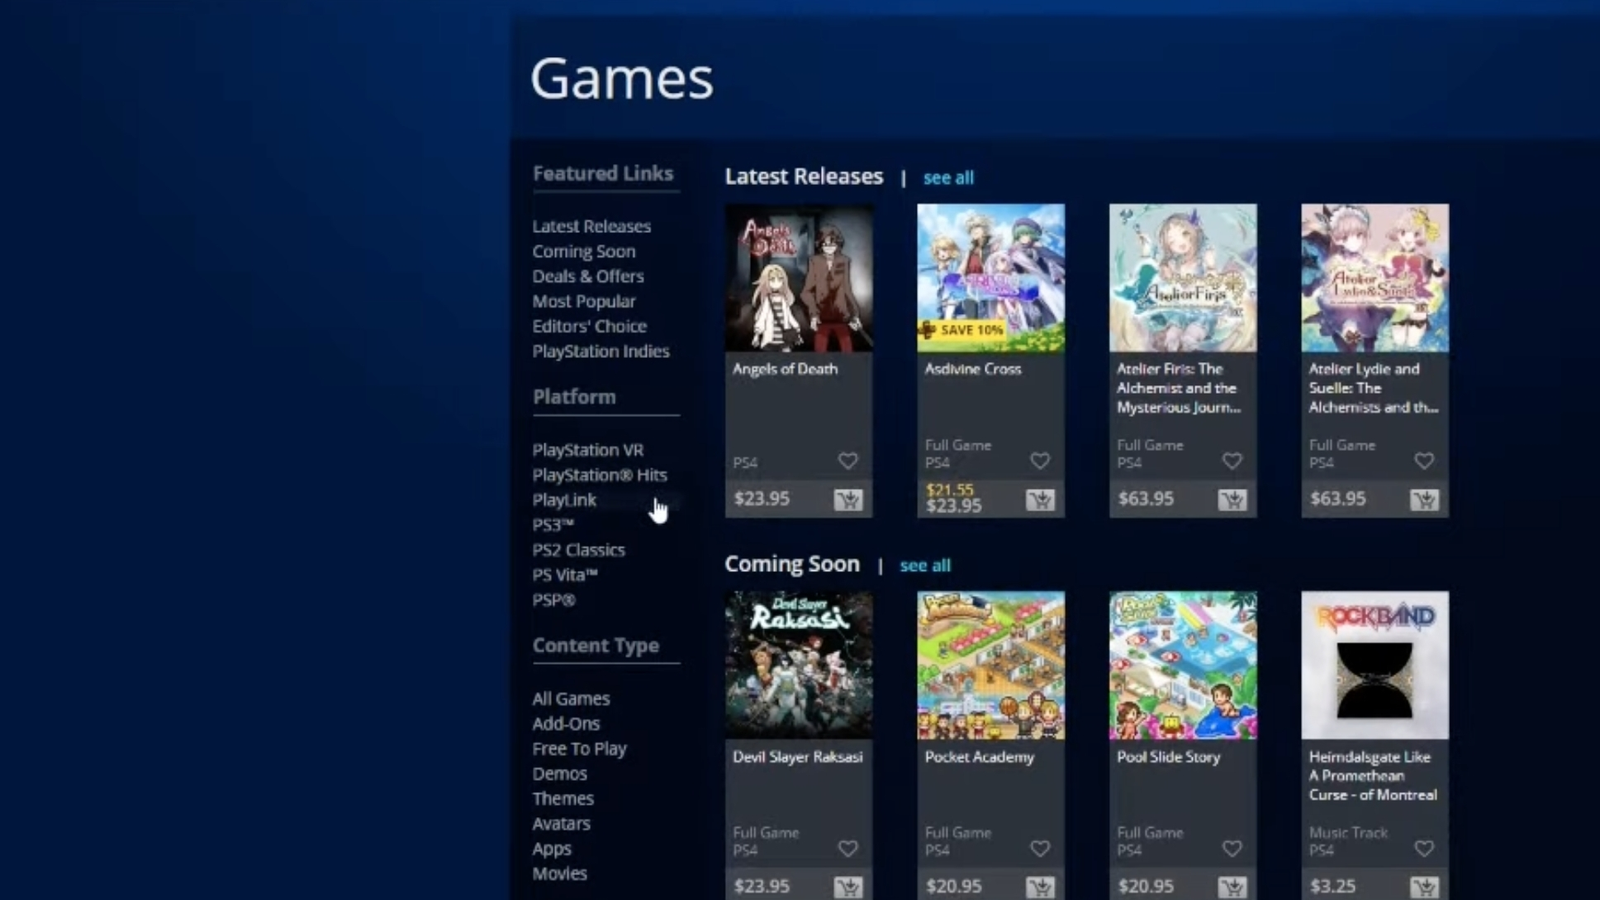 PS3, PS Vita Players Can't Download Purchased Games From PS Store